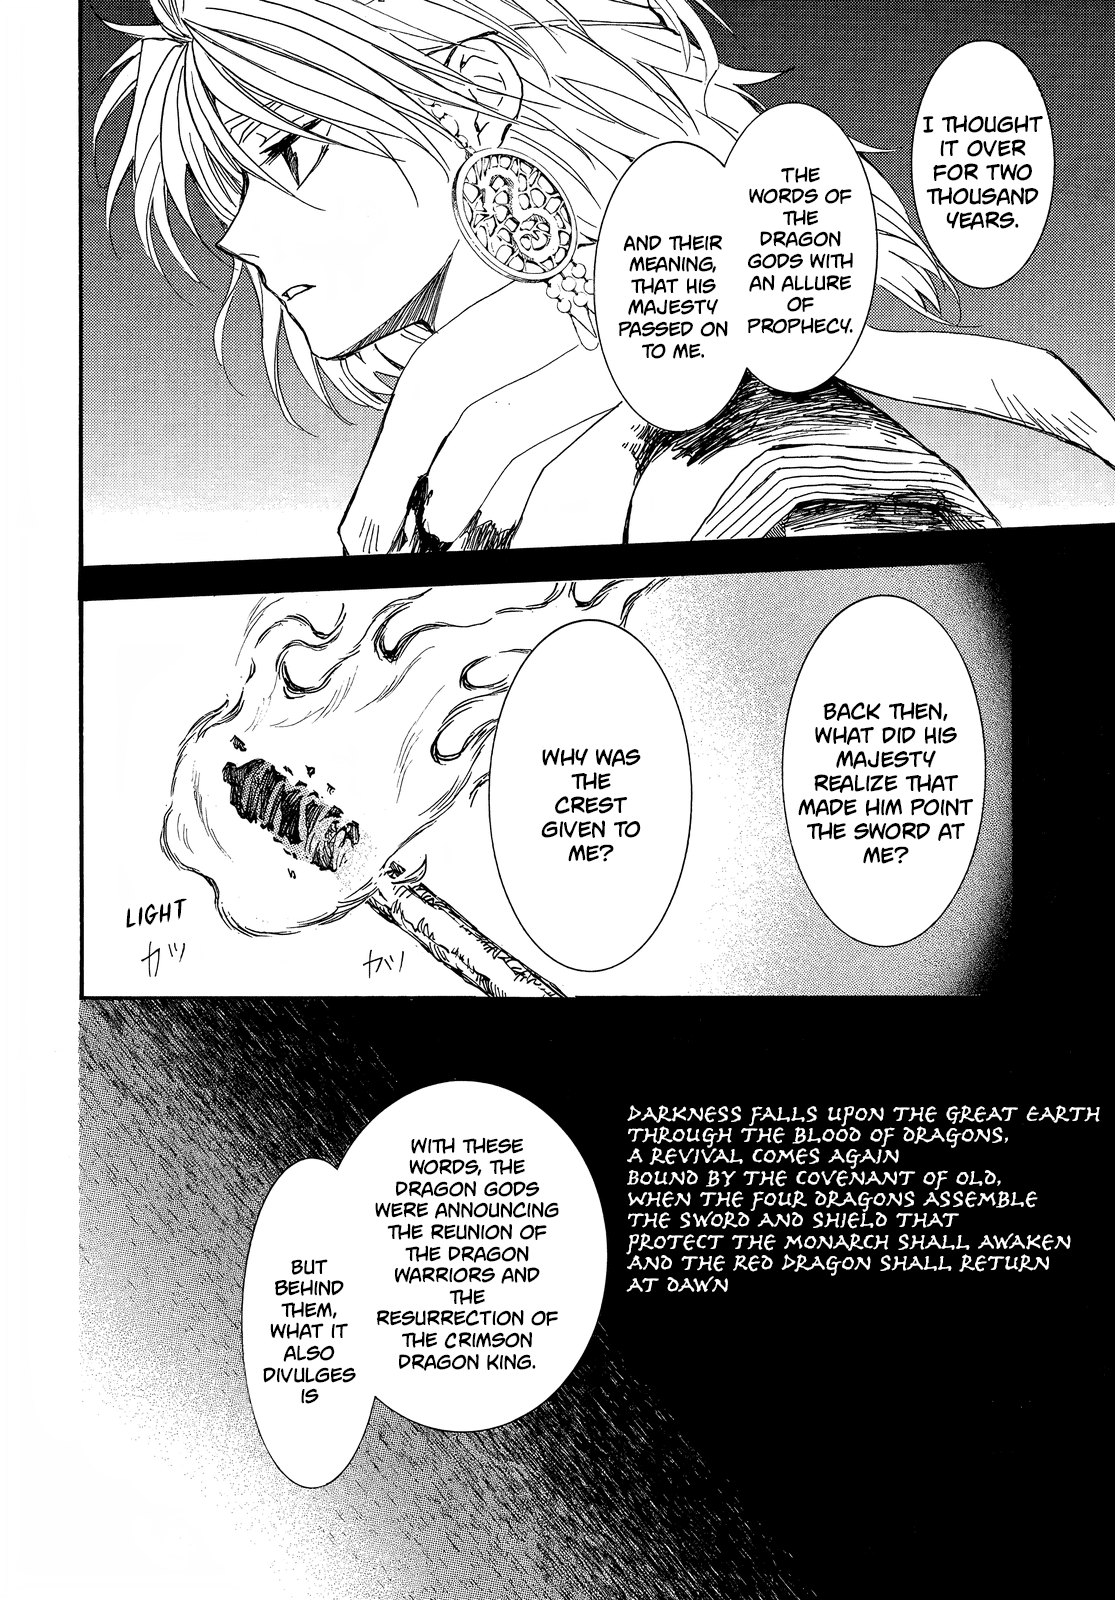 Akatsuki No Yona, Chapter 255 What was it we last talked about image 20